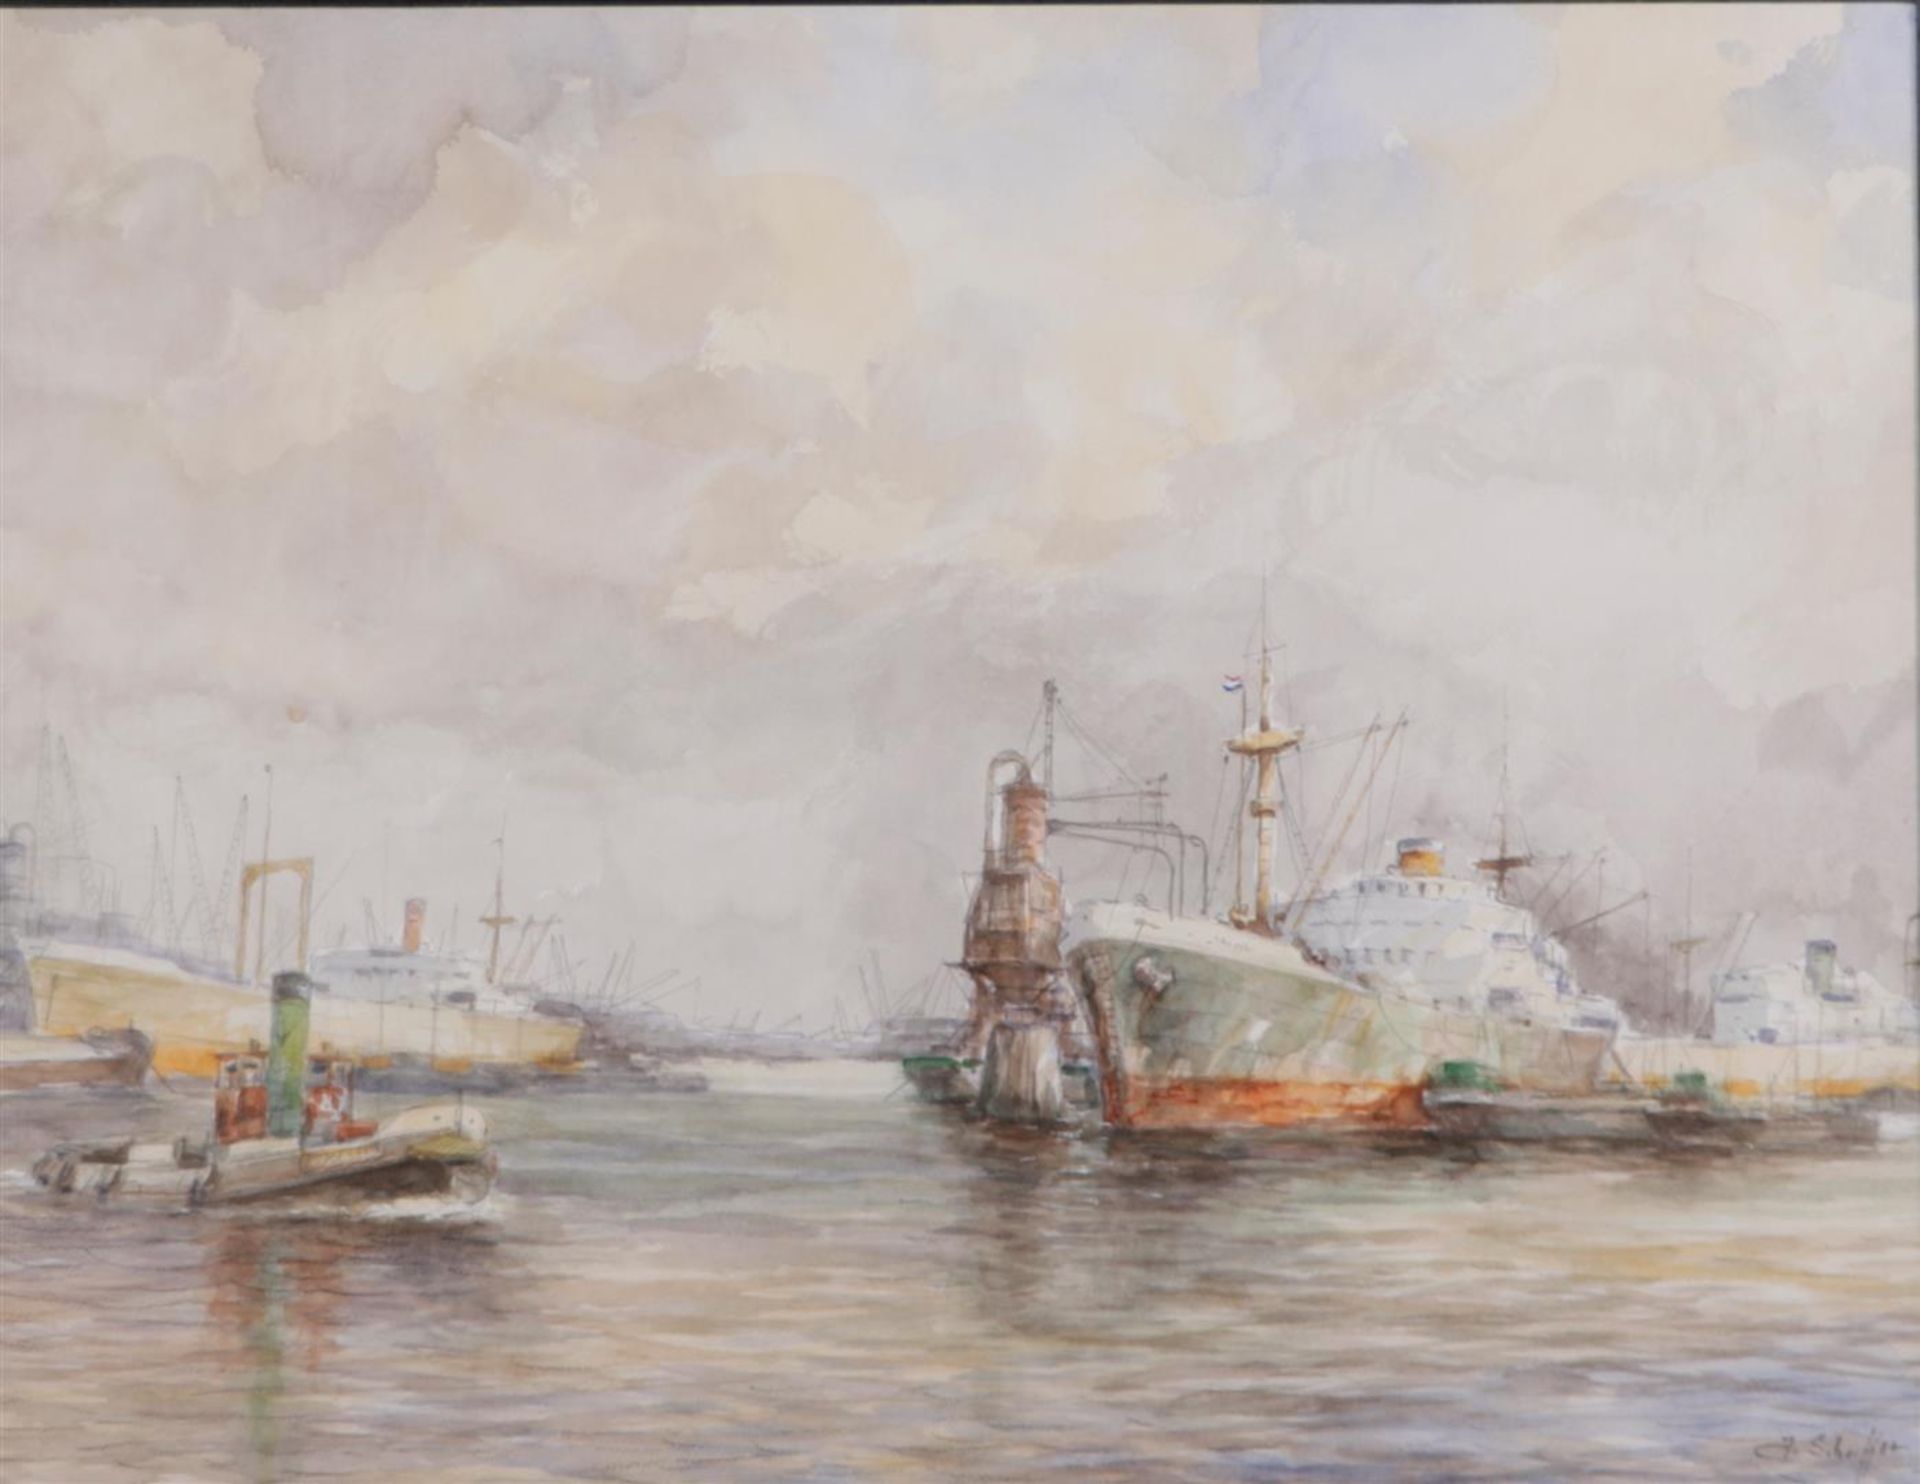 Jan Schaeffer (Rotterdam 1923 - 2018), Harbor view with ships. Watercolor and gouache on paper, sign